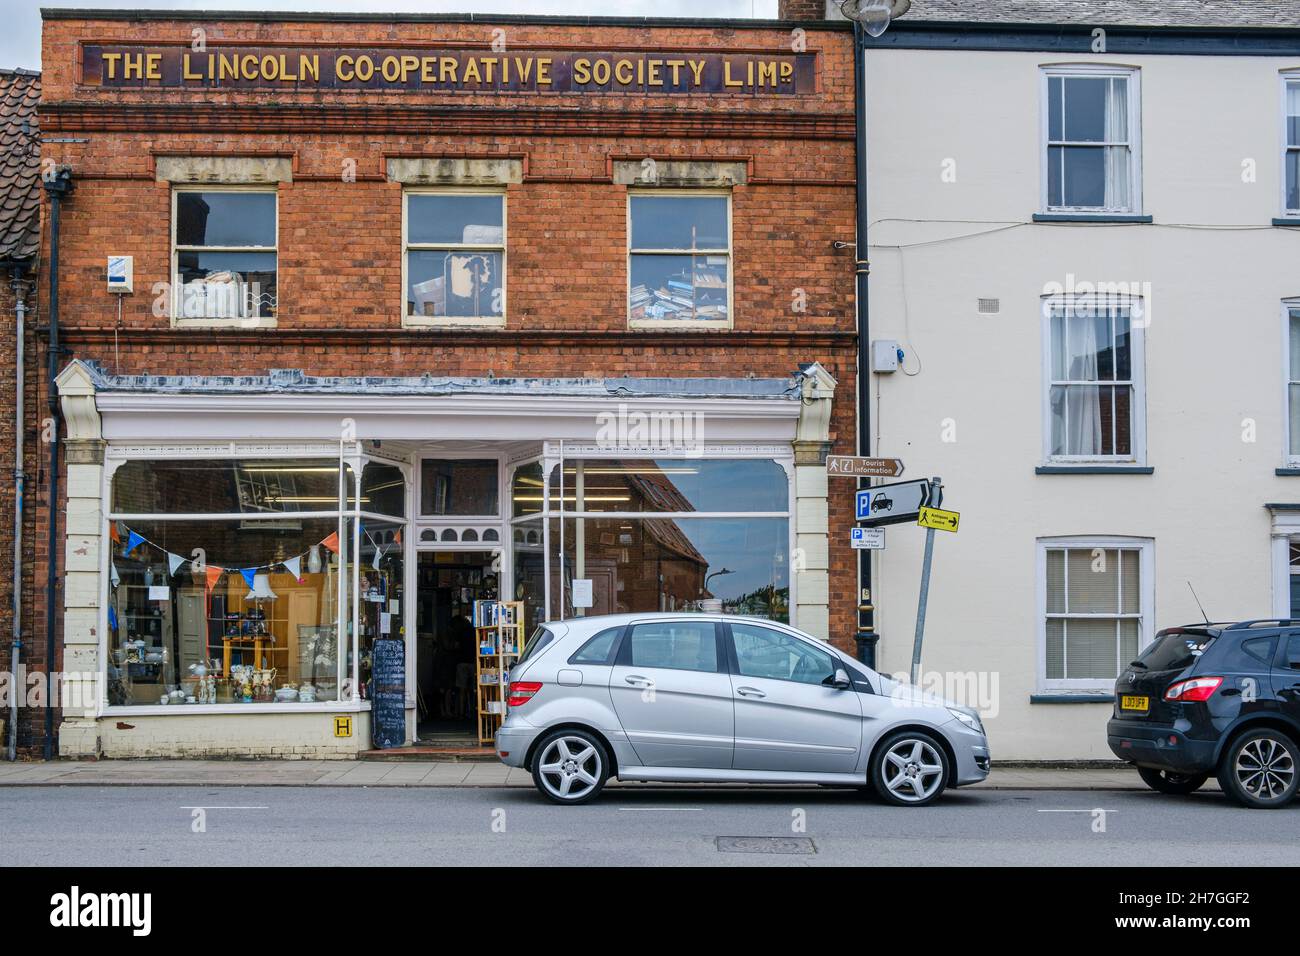 The former Lincoln Co Operative Society building in Horncastle which is now a shop selling second-hand goods and antiques, Lincolnshire, England Stock Photo